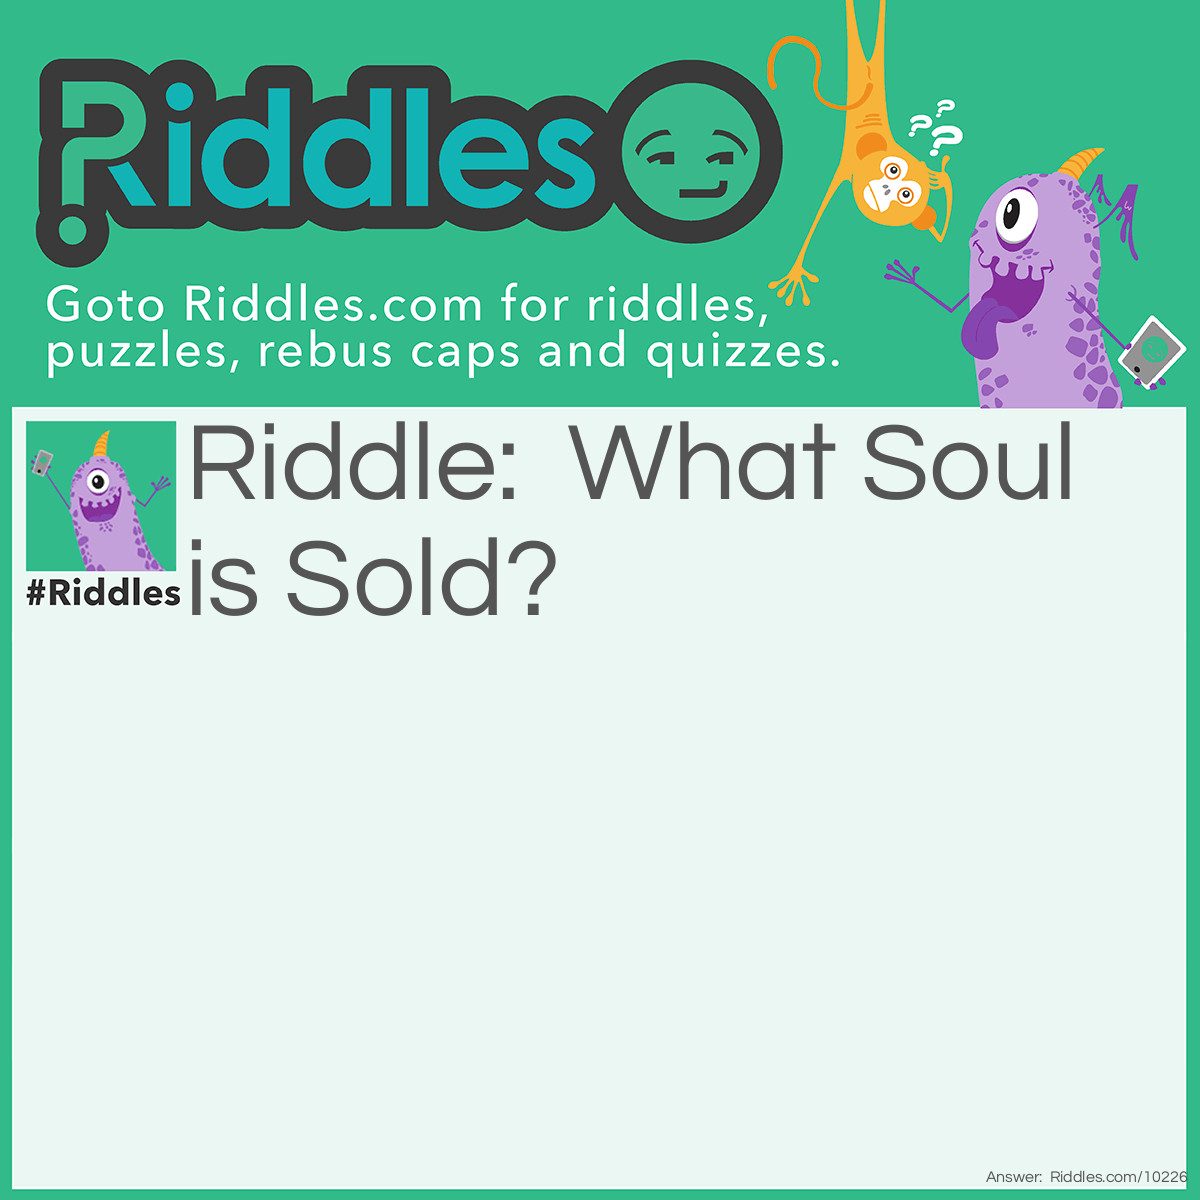 Riddle: What Soul is Sold? Answer: A Sole of a Shoe.